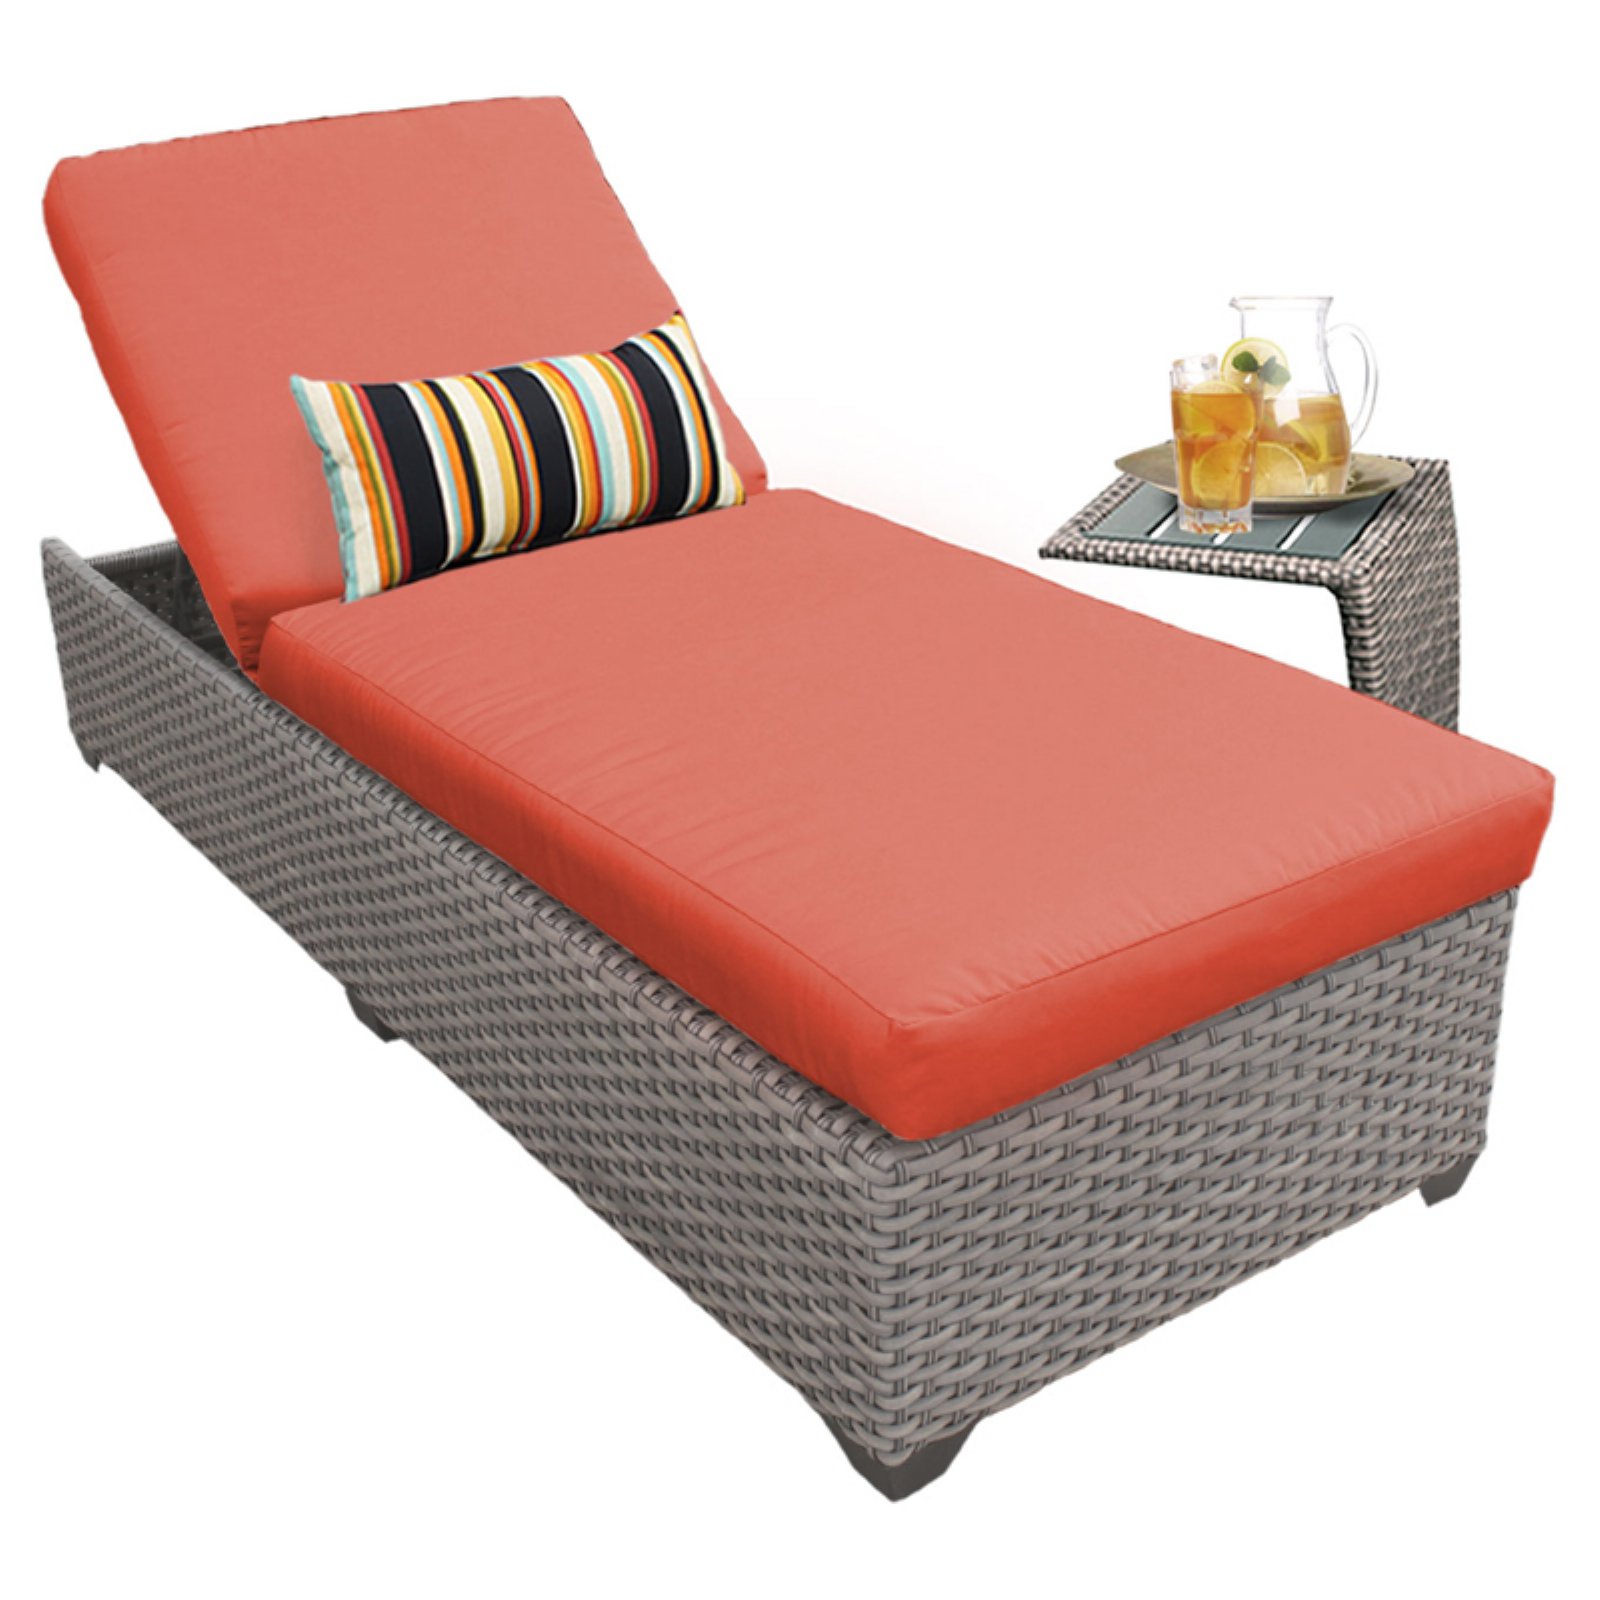 TK Classics Florence All Weather Wicker Outdoor Chaise - image 1 of 2